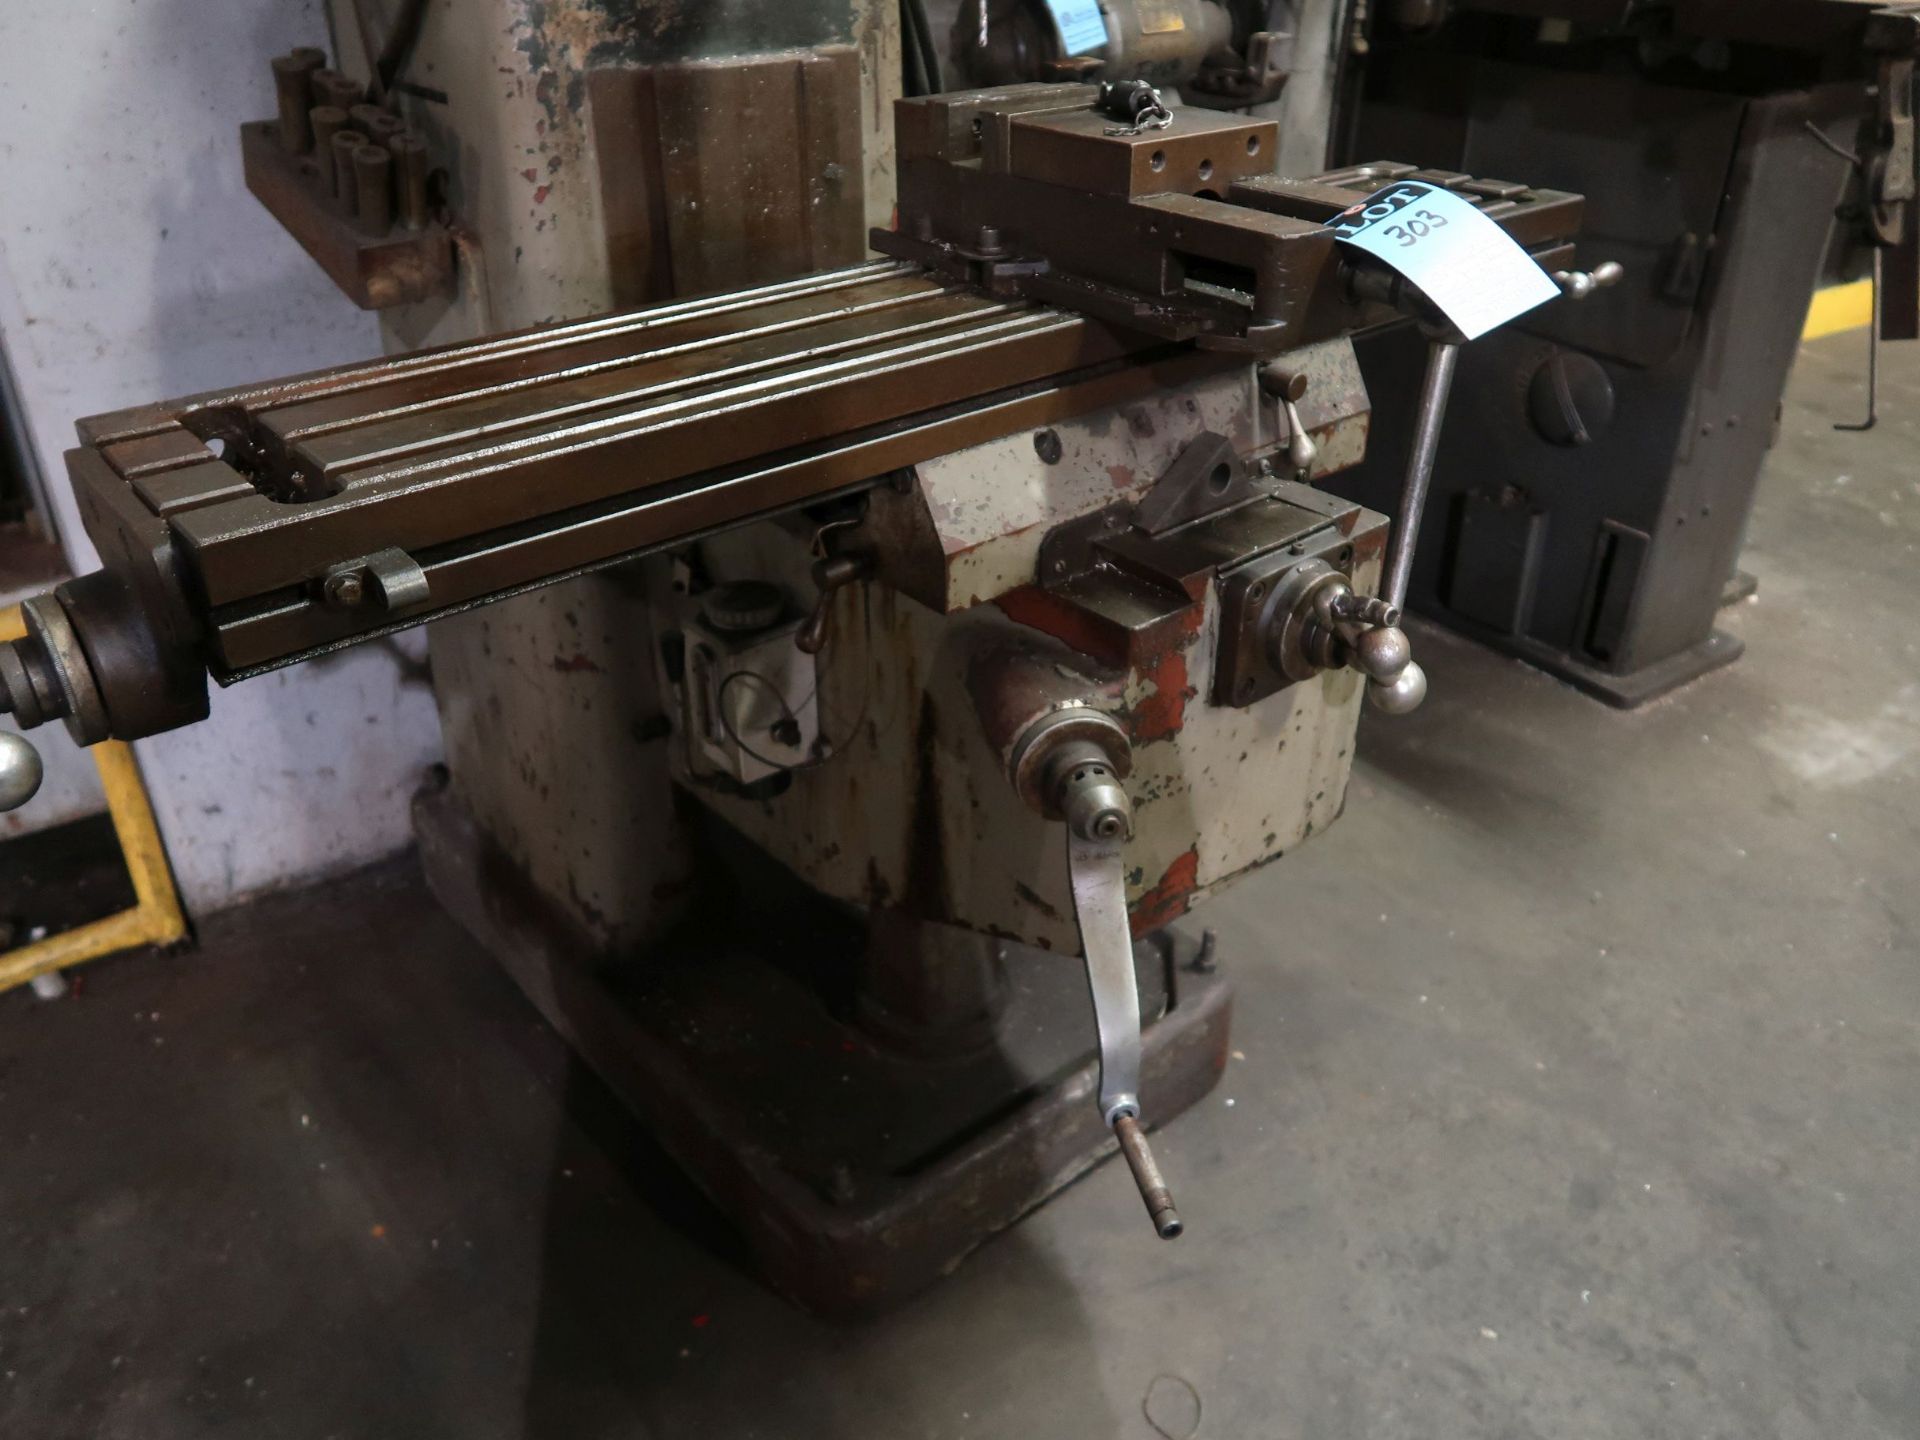 3 HP WEBB VERTICAL MILLING MACHINE; S/N 1855, SPINDLE SPEED 60-4,200 RPM, 9" X 48" TABLE - Image 6 of 6